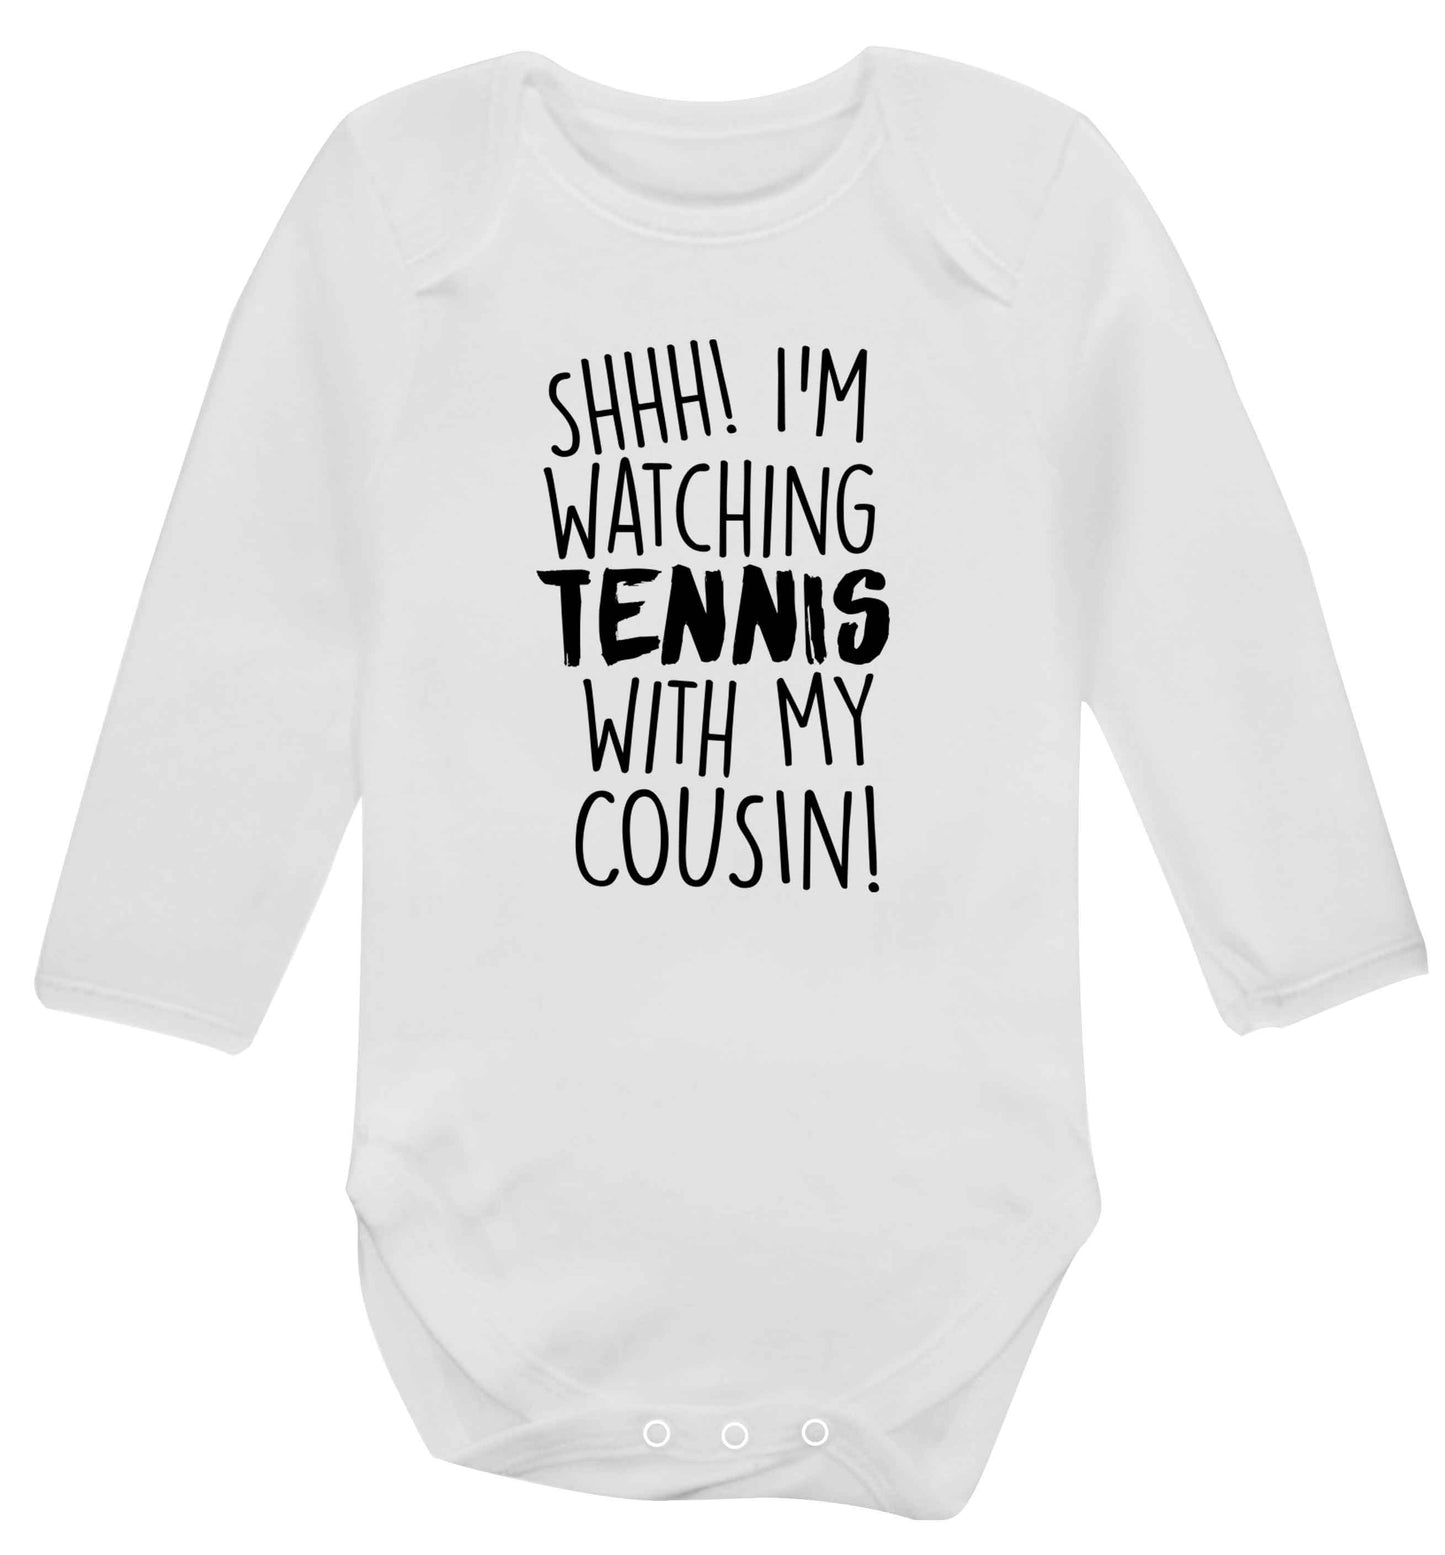 Shh! I'm watching tennis with my cousin! Baby Vest long sleeved white 6-12 months